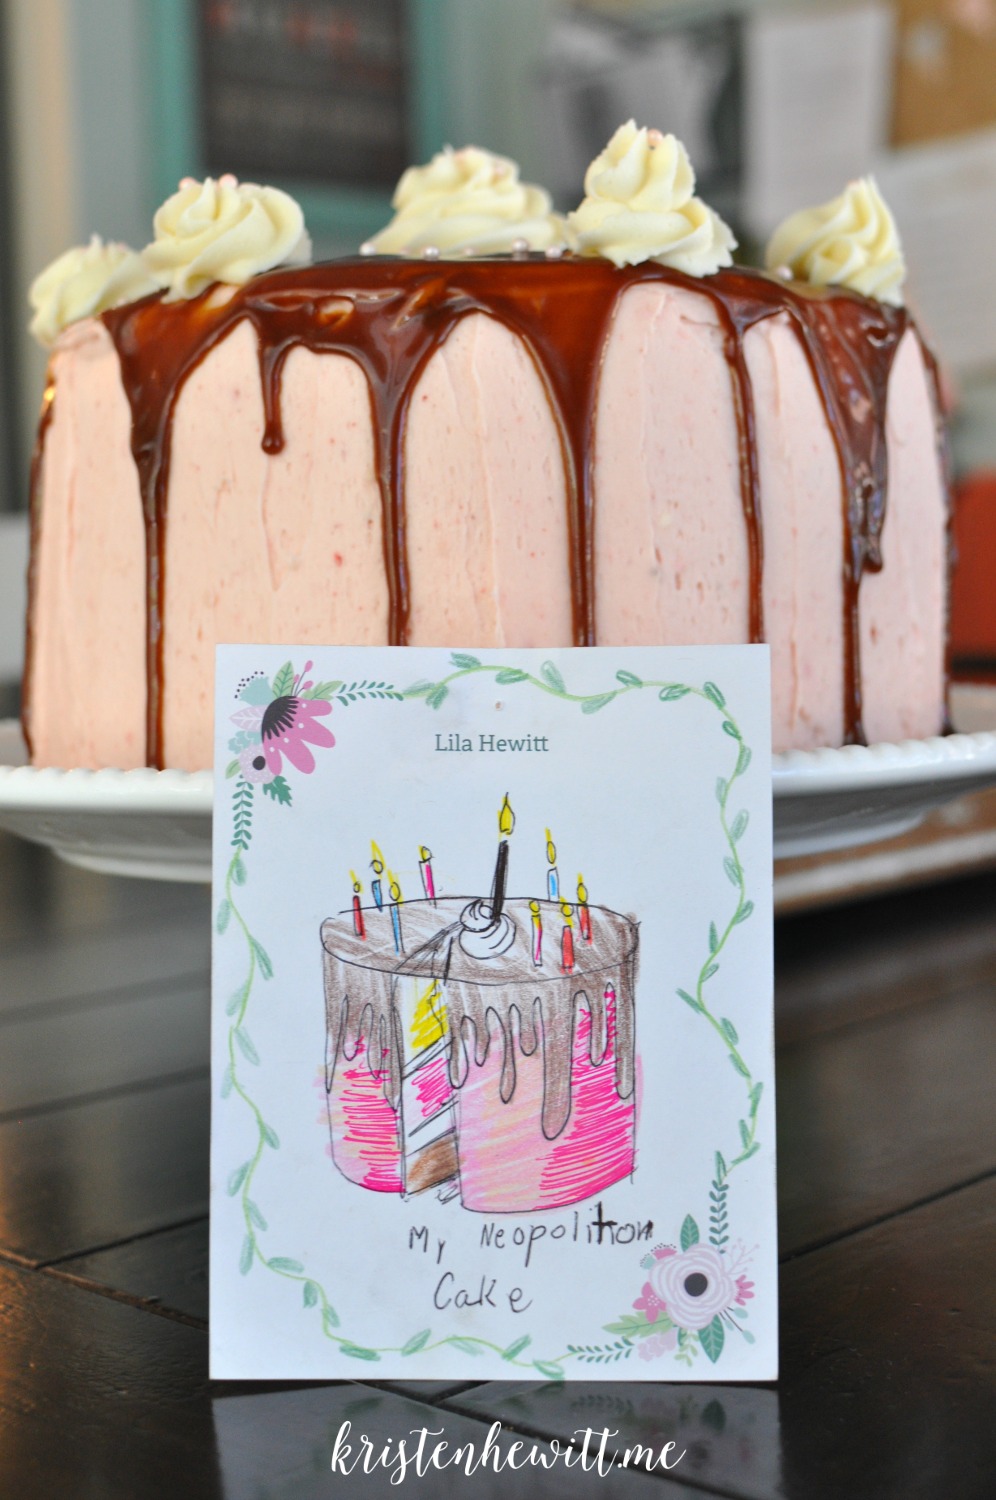 Looking for a unique yet elegant birthday cake? Try this DIY Neapolitan Drip Birthday Cake and surprise your guests with a beautiful dessert!